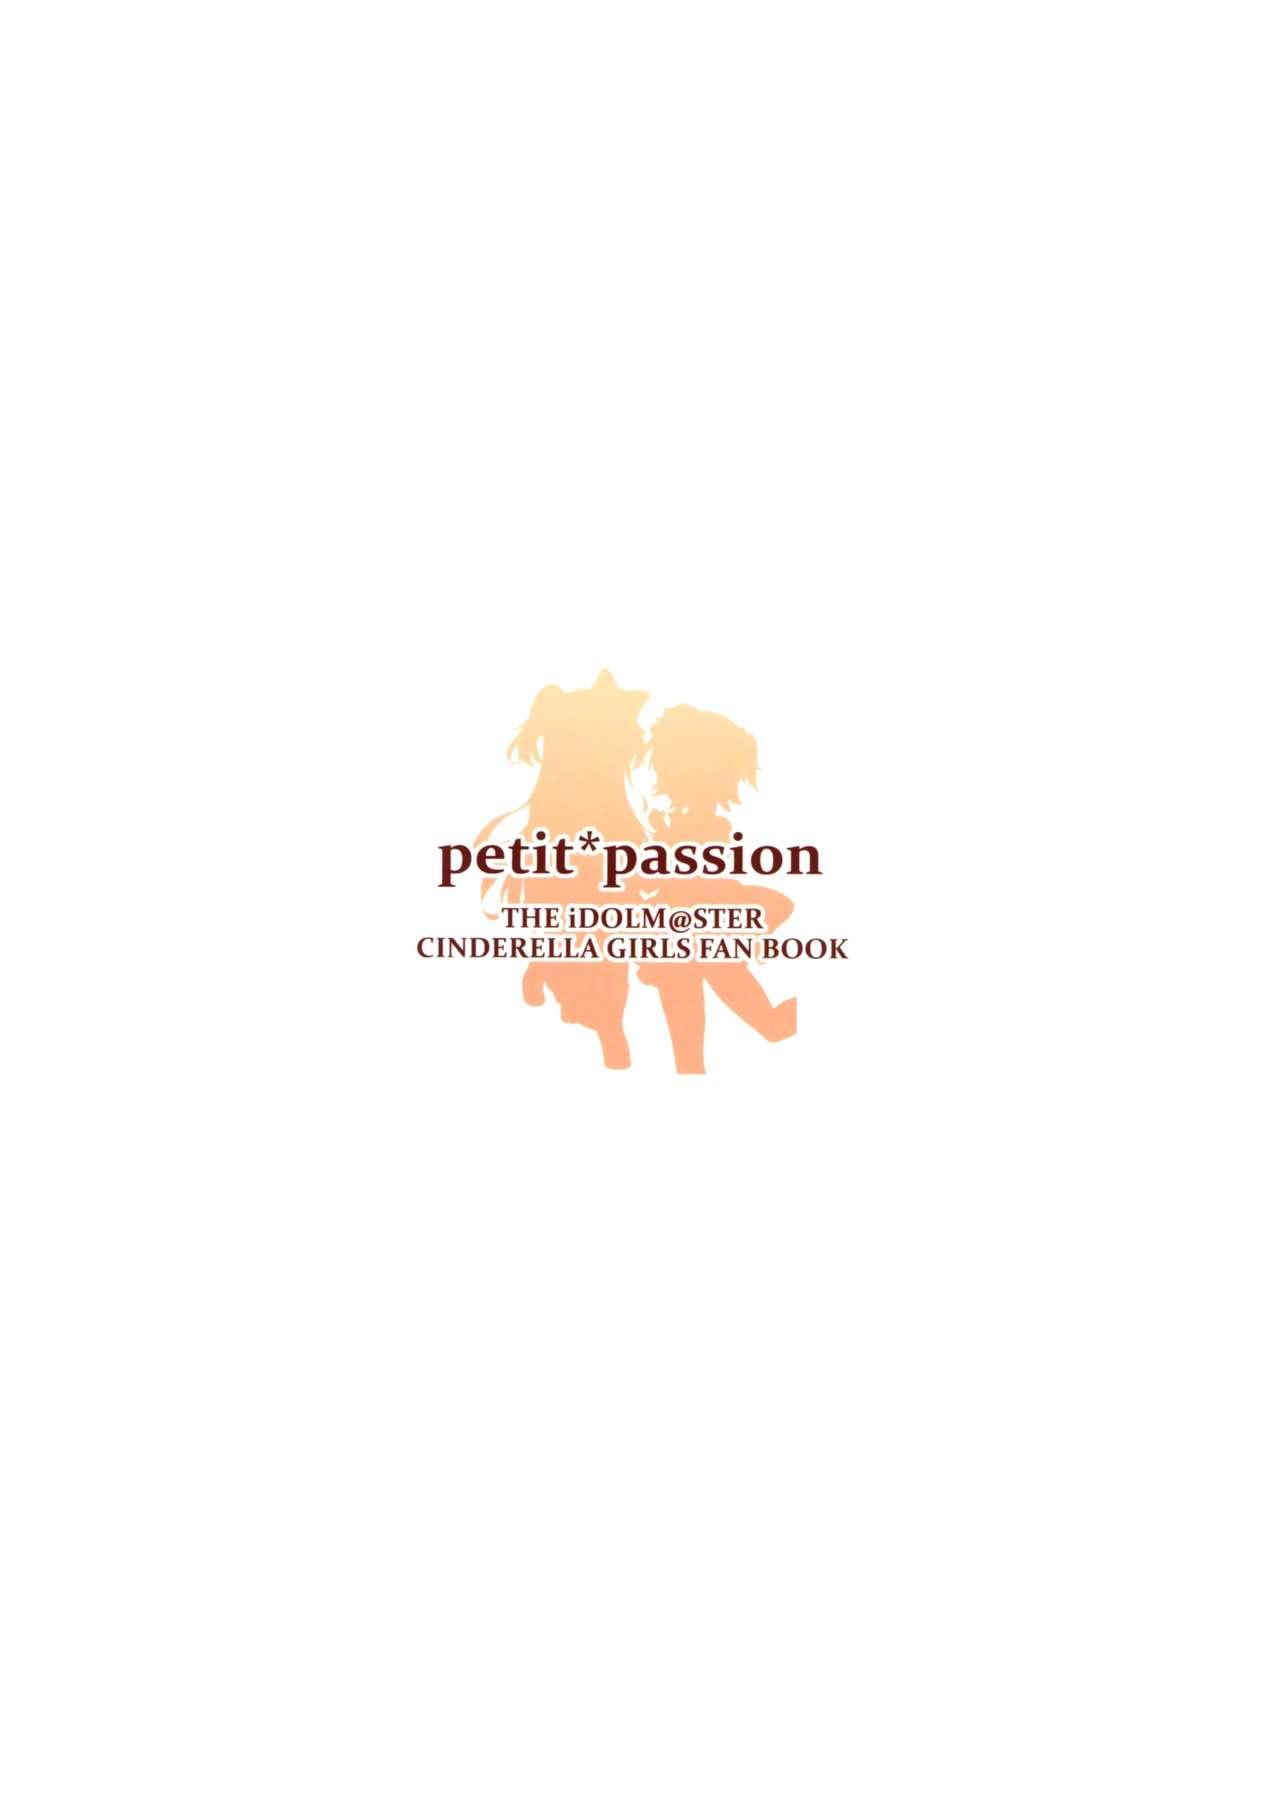 Blowjob petit*passion - The idolmaster Reality Porn - Page 22